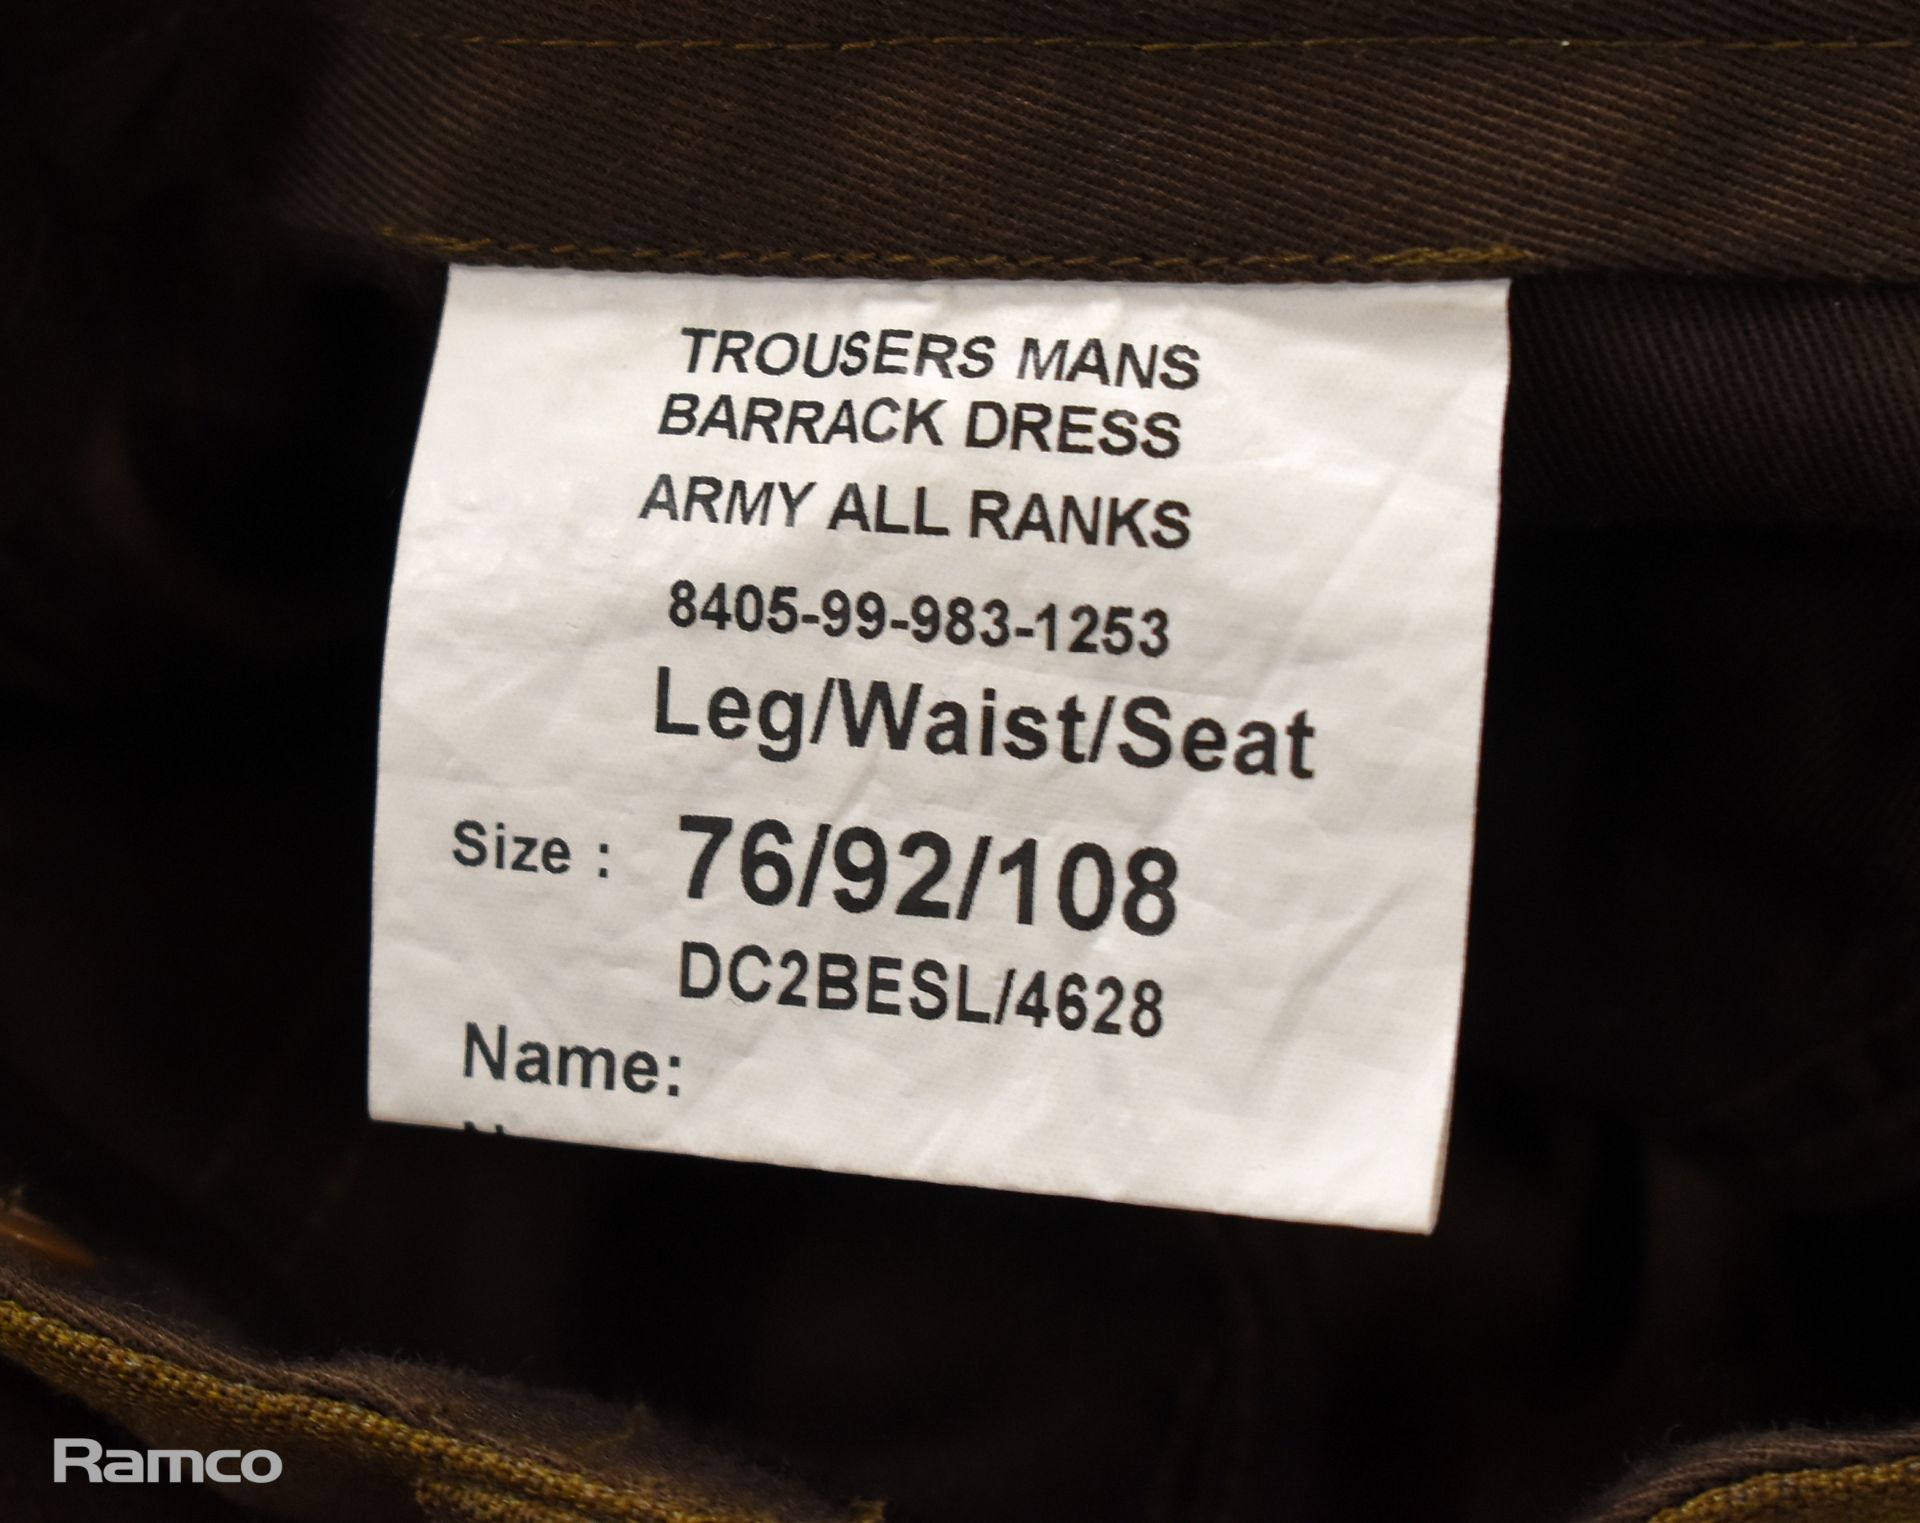 50x British Army No. 2 Dress trousers - mixed grades and sizes - Image 8 of 11